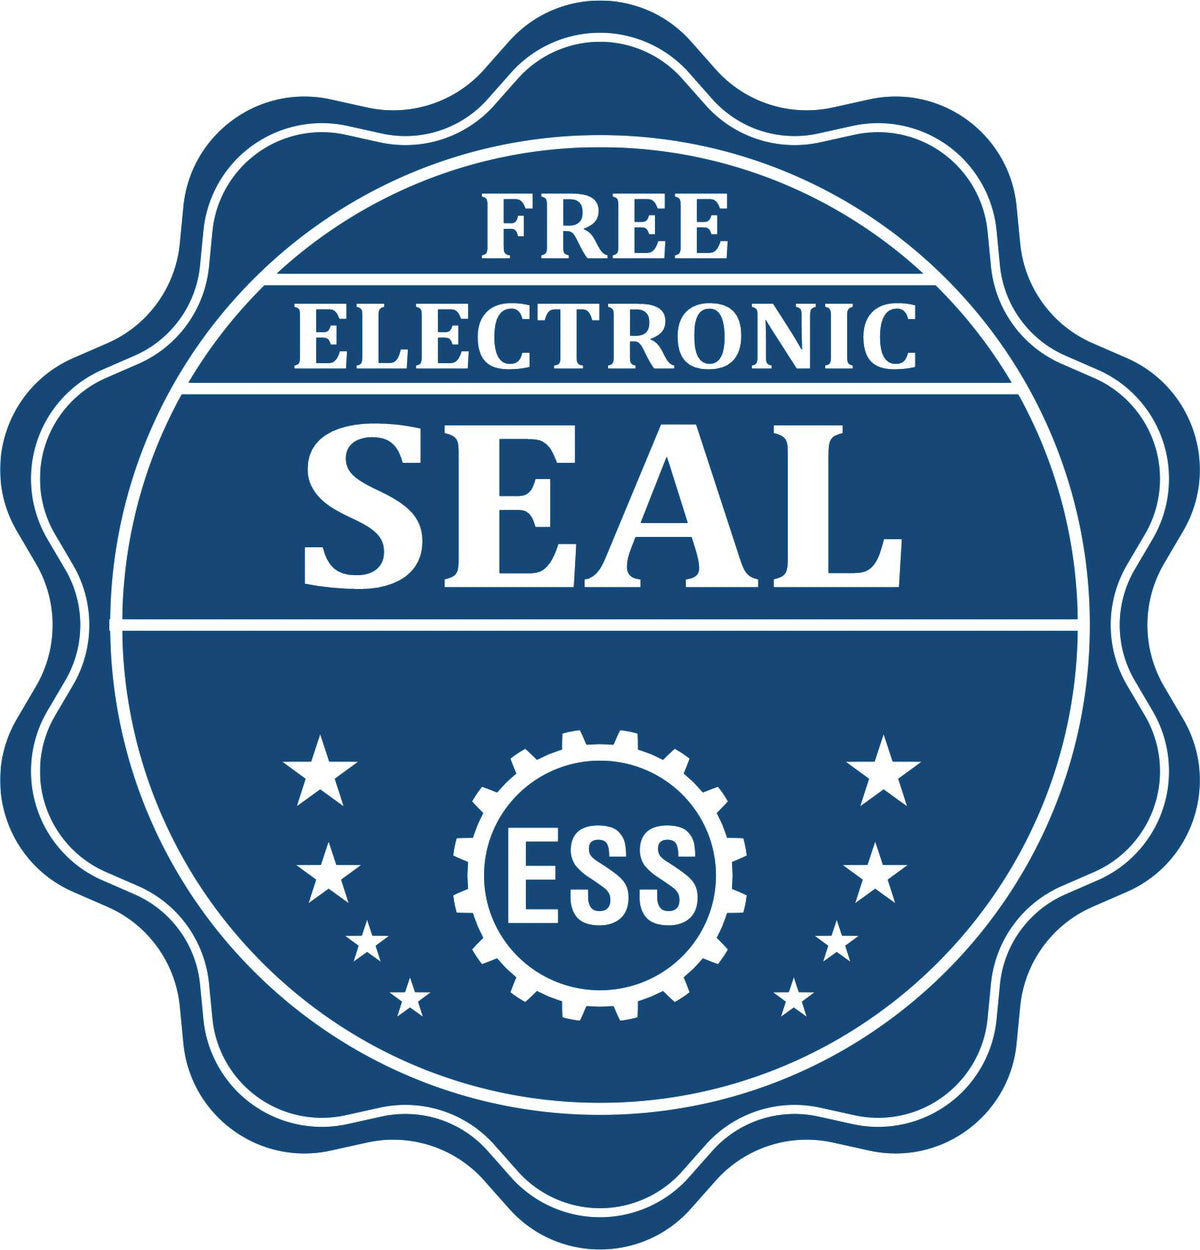 A badge showing a free electronic seal for the Hybrid New Hampshire Landscape Architect Seal with stars and the ESS gear on the emblem.